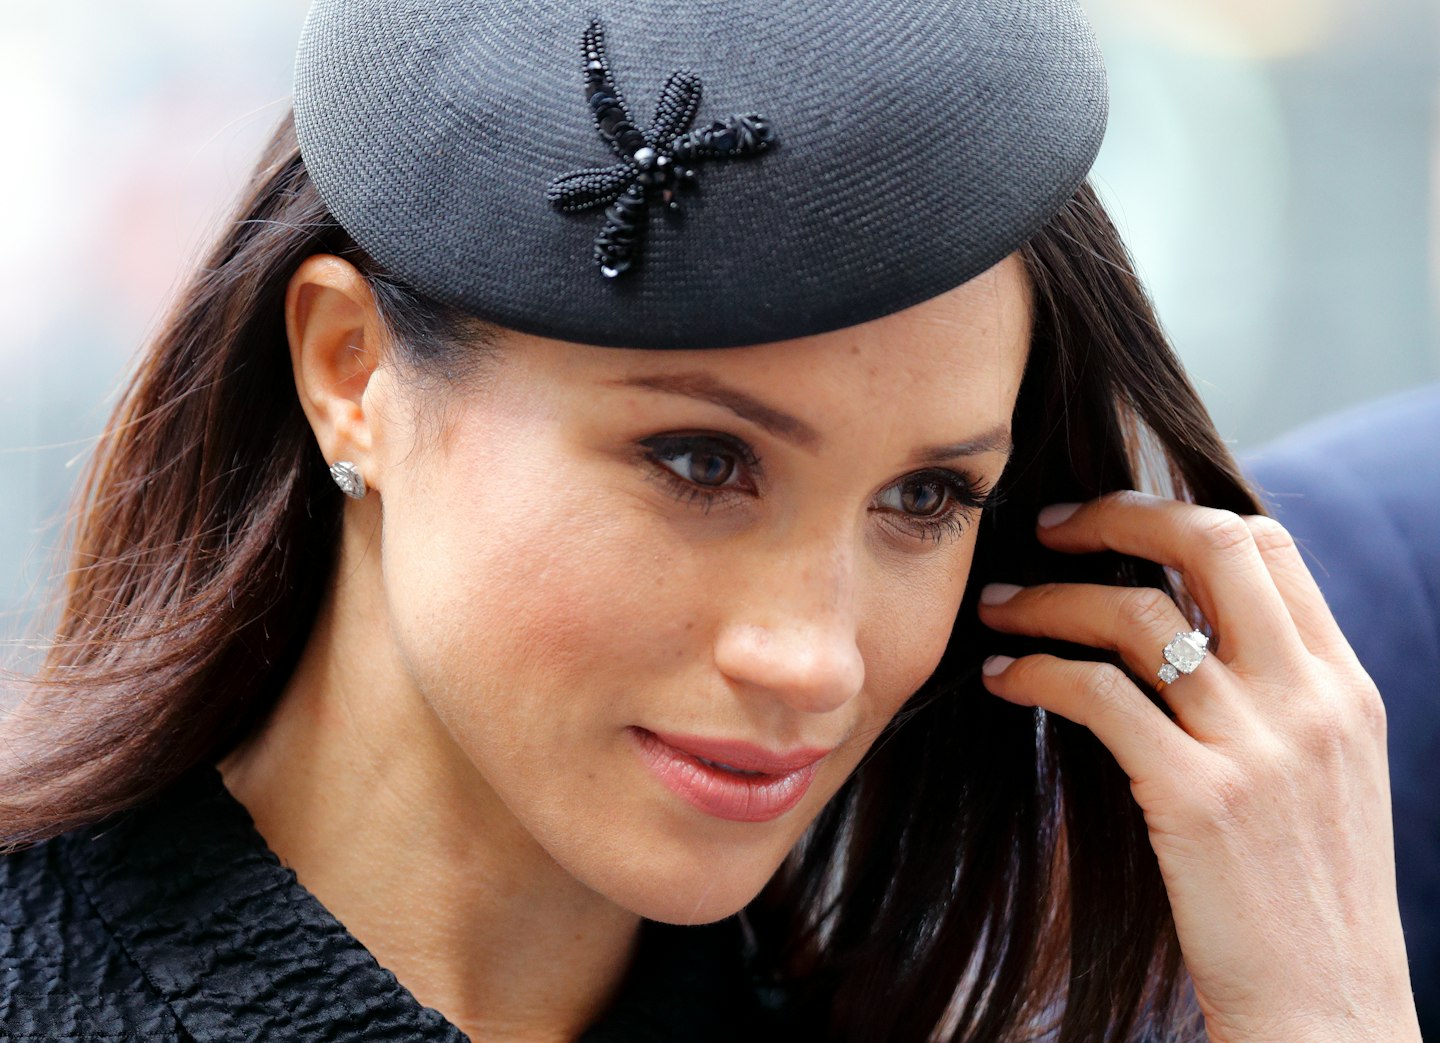 Meghan Markle made headlines in June 2019 when she altered her engagement ring, swapping gold for a diamond pave band. While the ring itself is new, commissioned by Prince Harry from Cleave & Company, who hold a royal warrant for the design, manufacture and supply of insignia, the twin stones sitting either side of the central diamond belonged to Princess Diana.